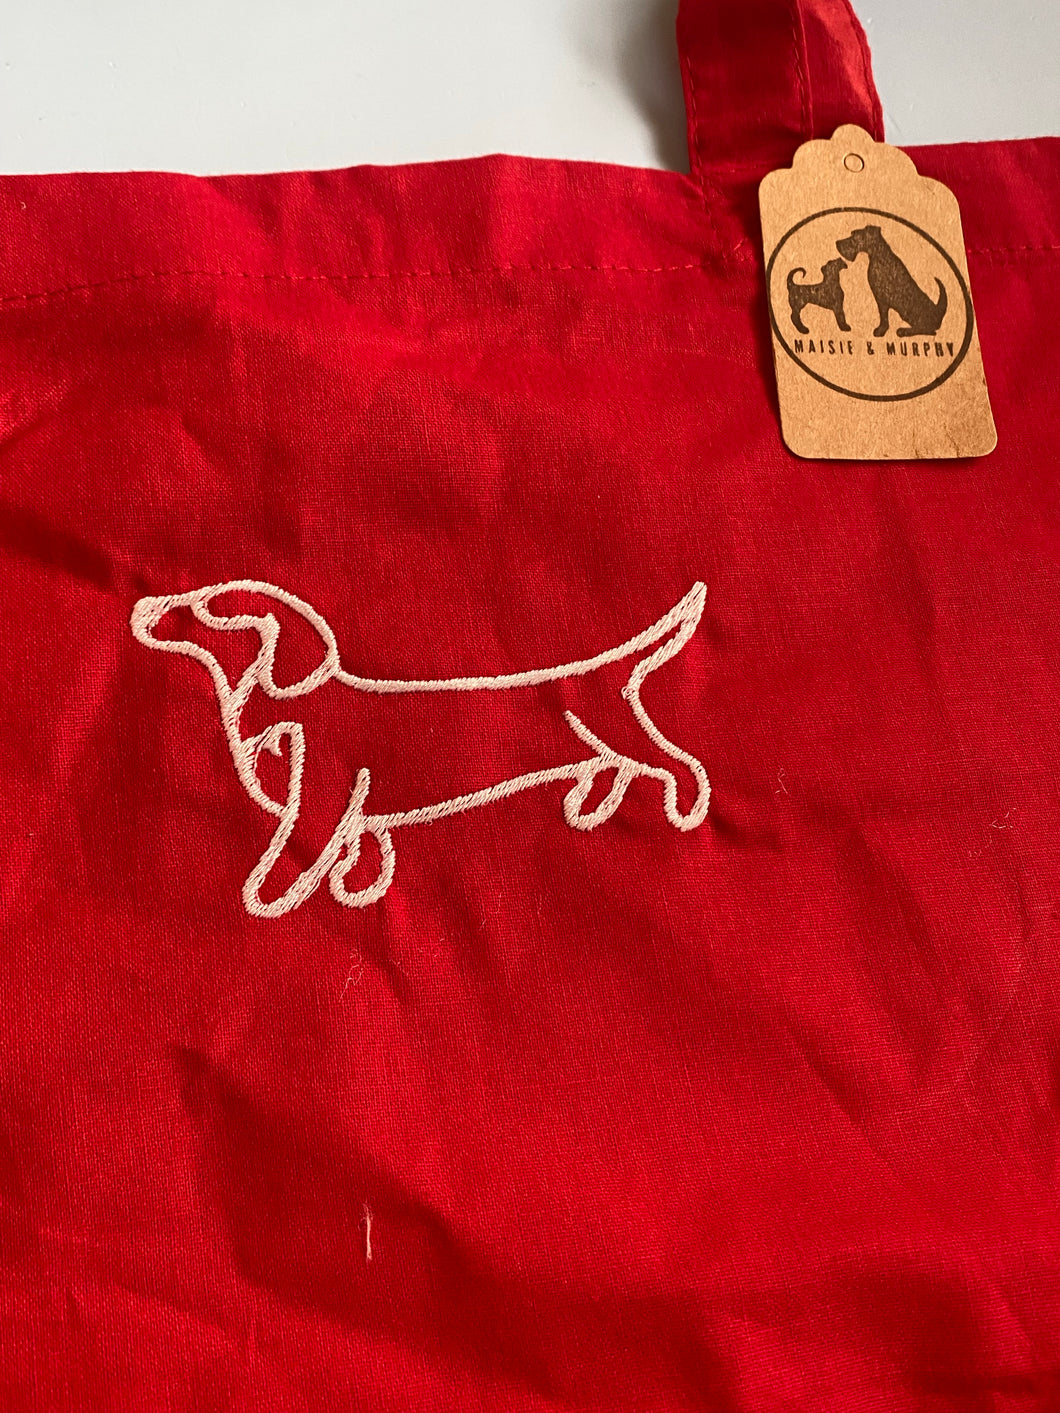 OLD STOCK DACHSHUND TOTE BAG - Red